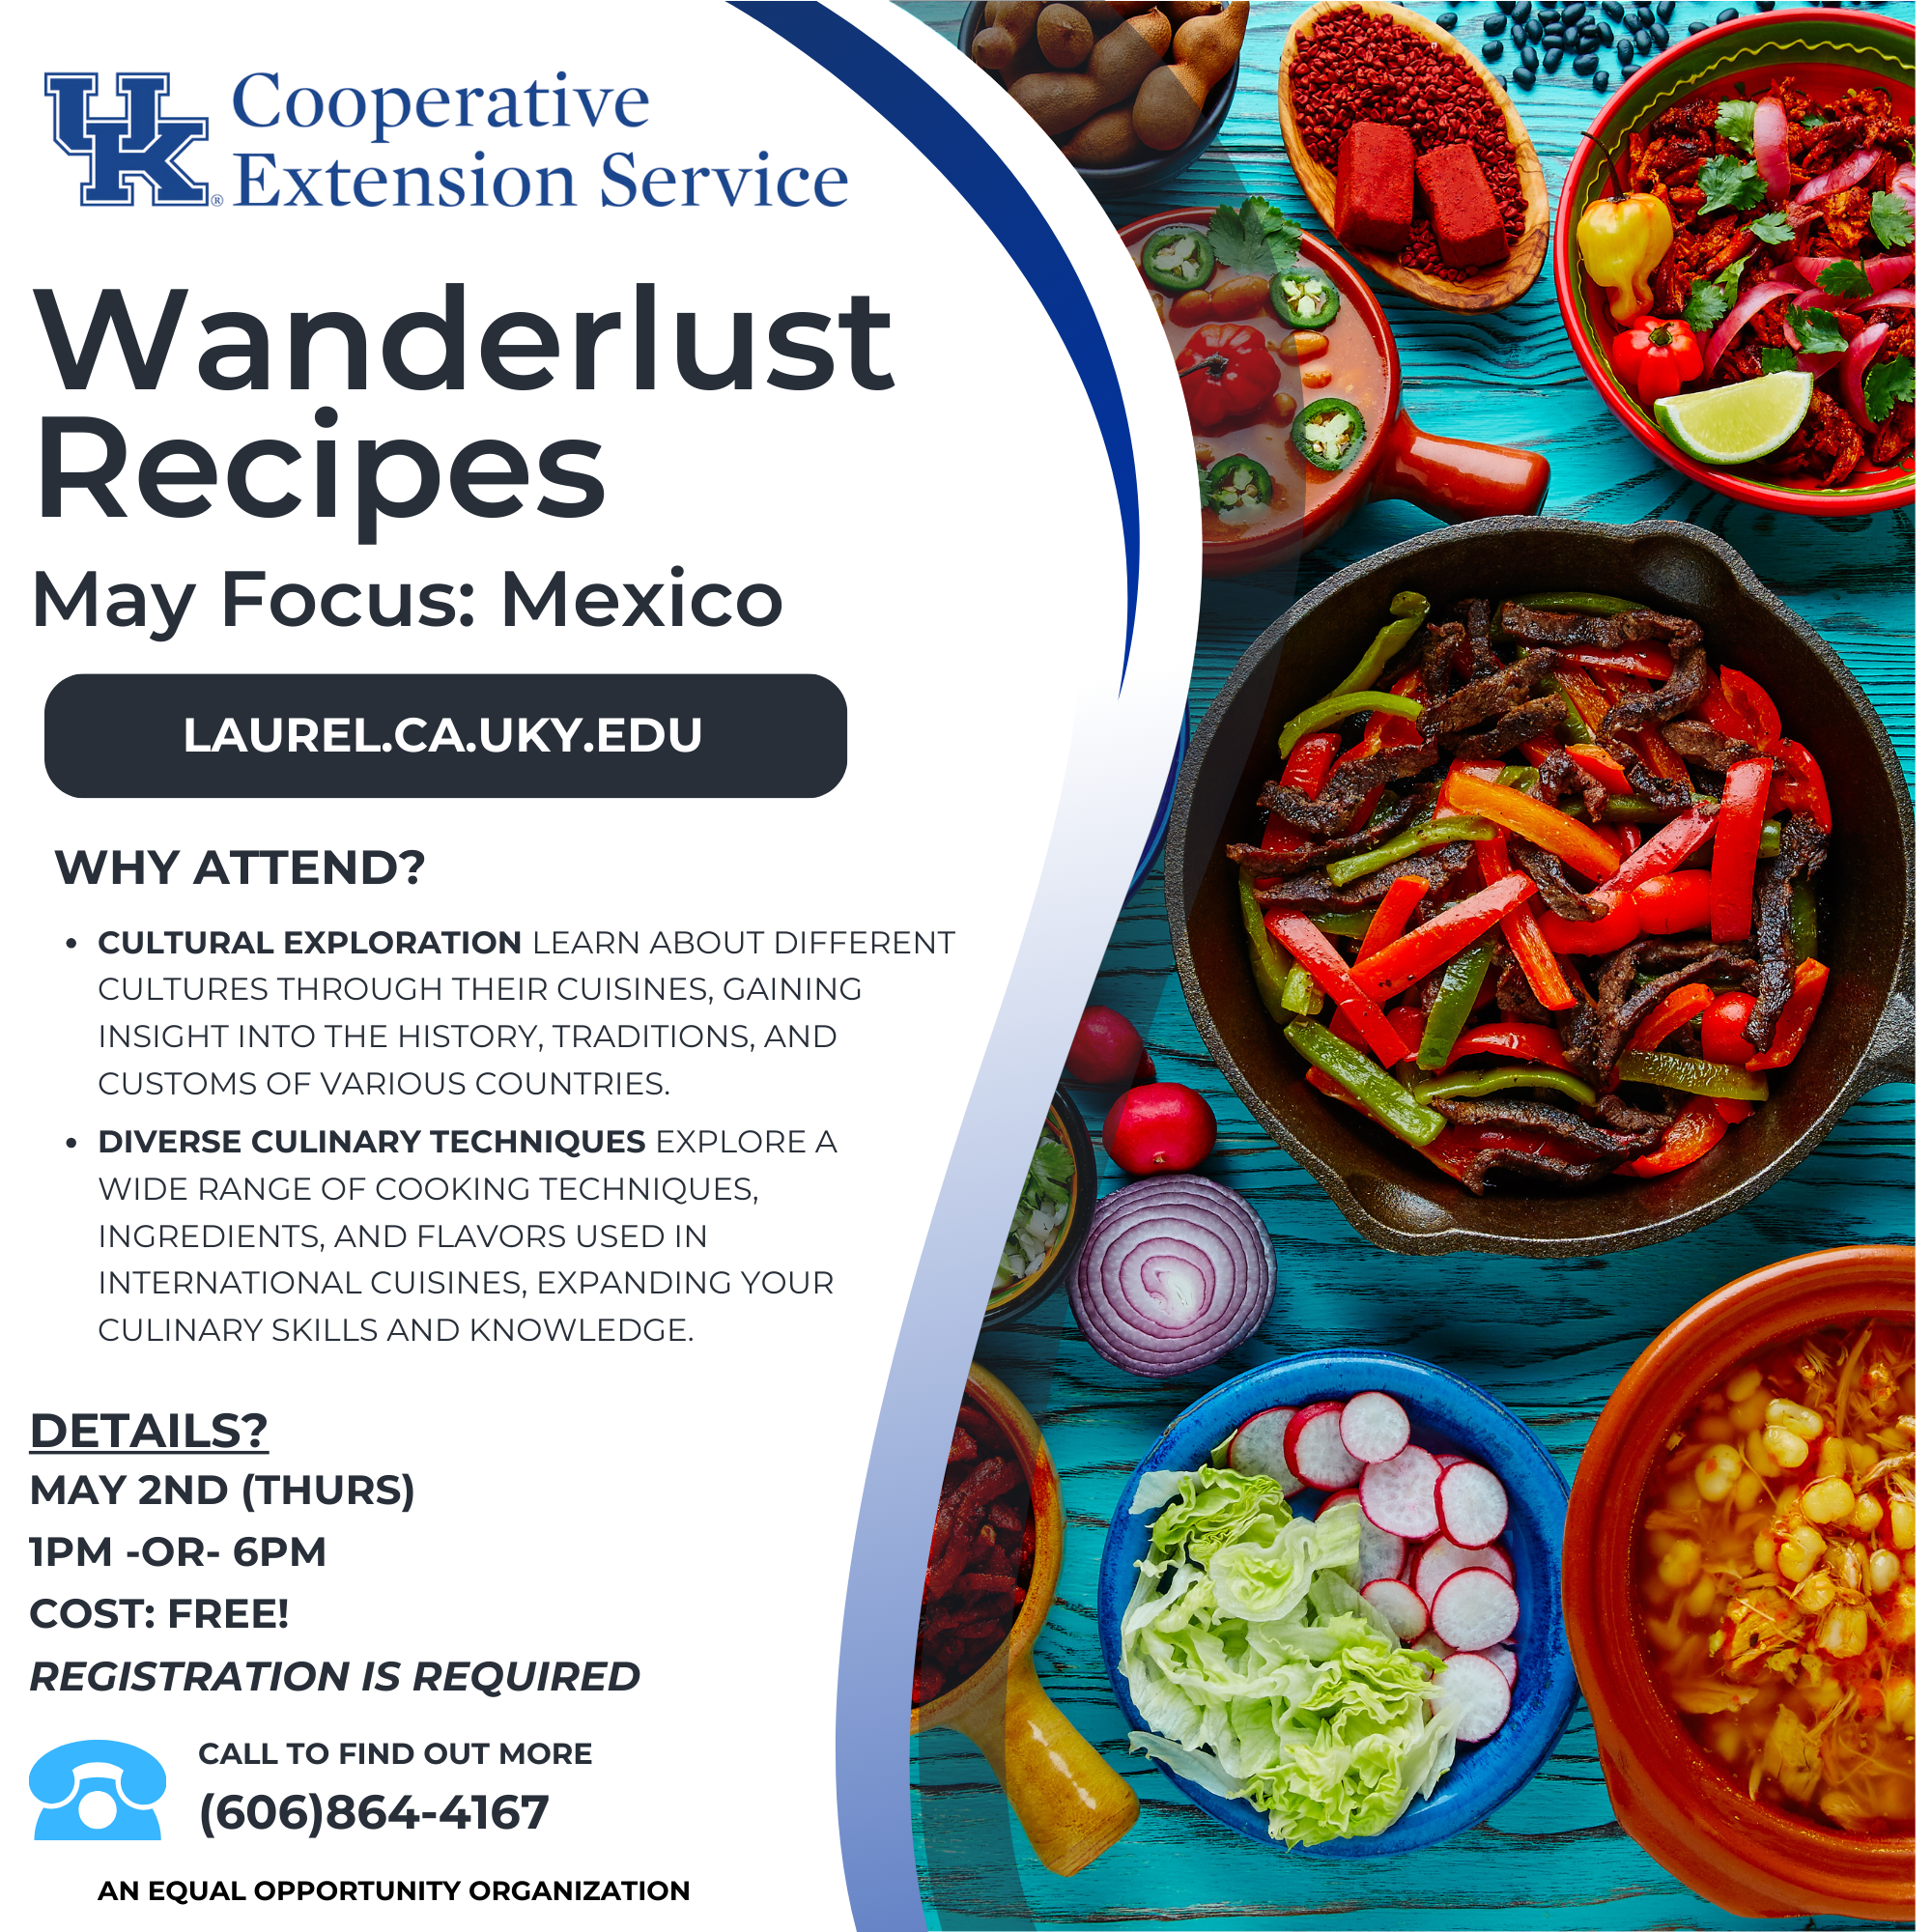 Flyer with background containing vegetables and includes class date details.